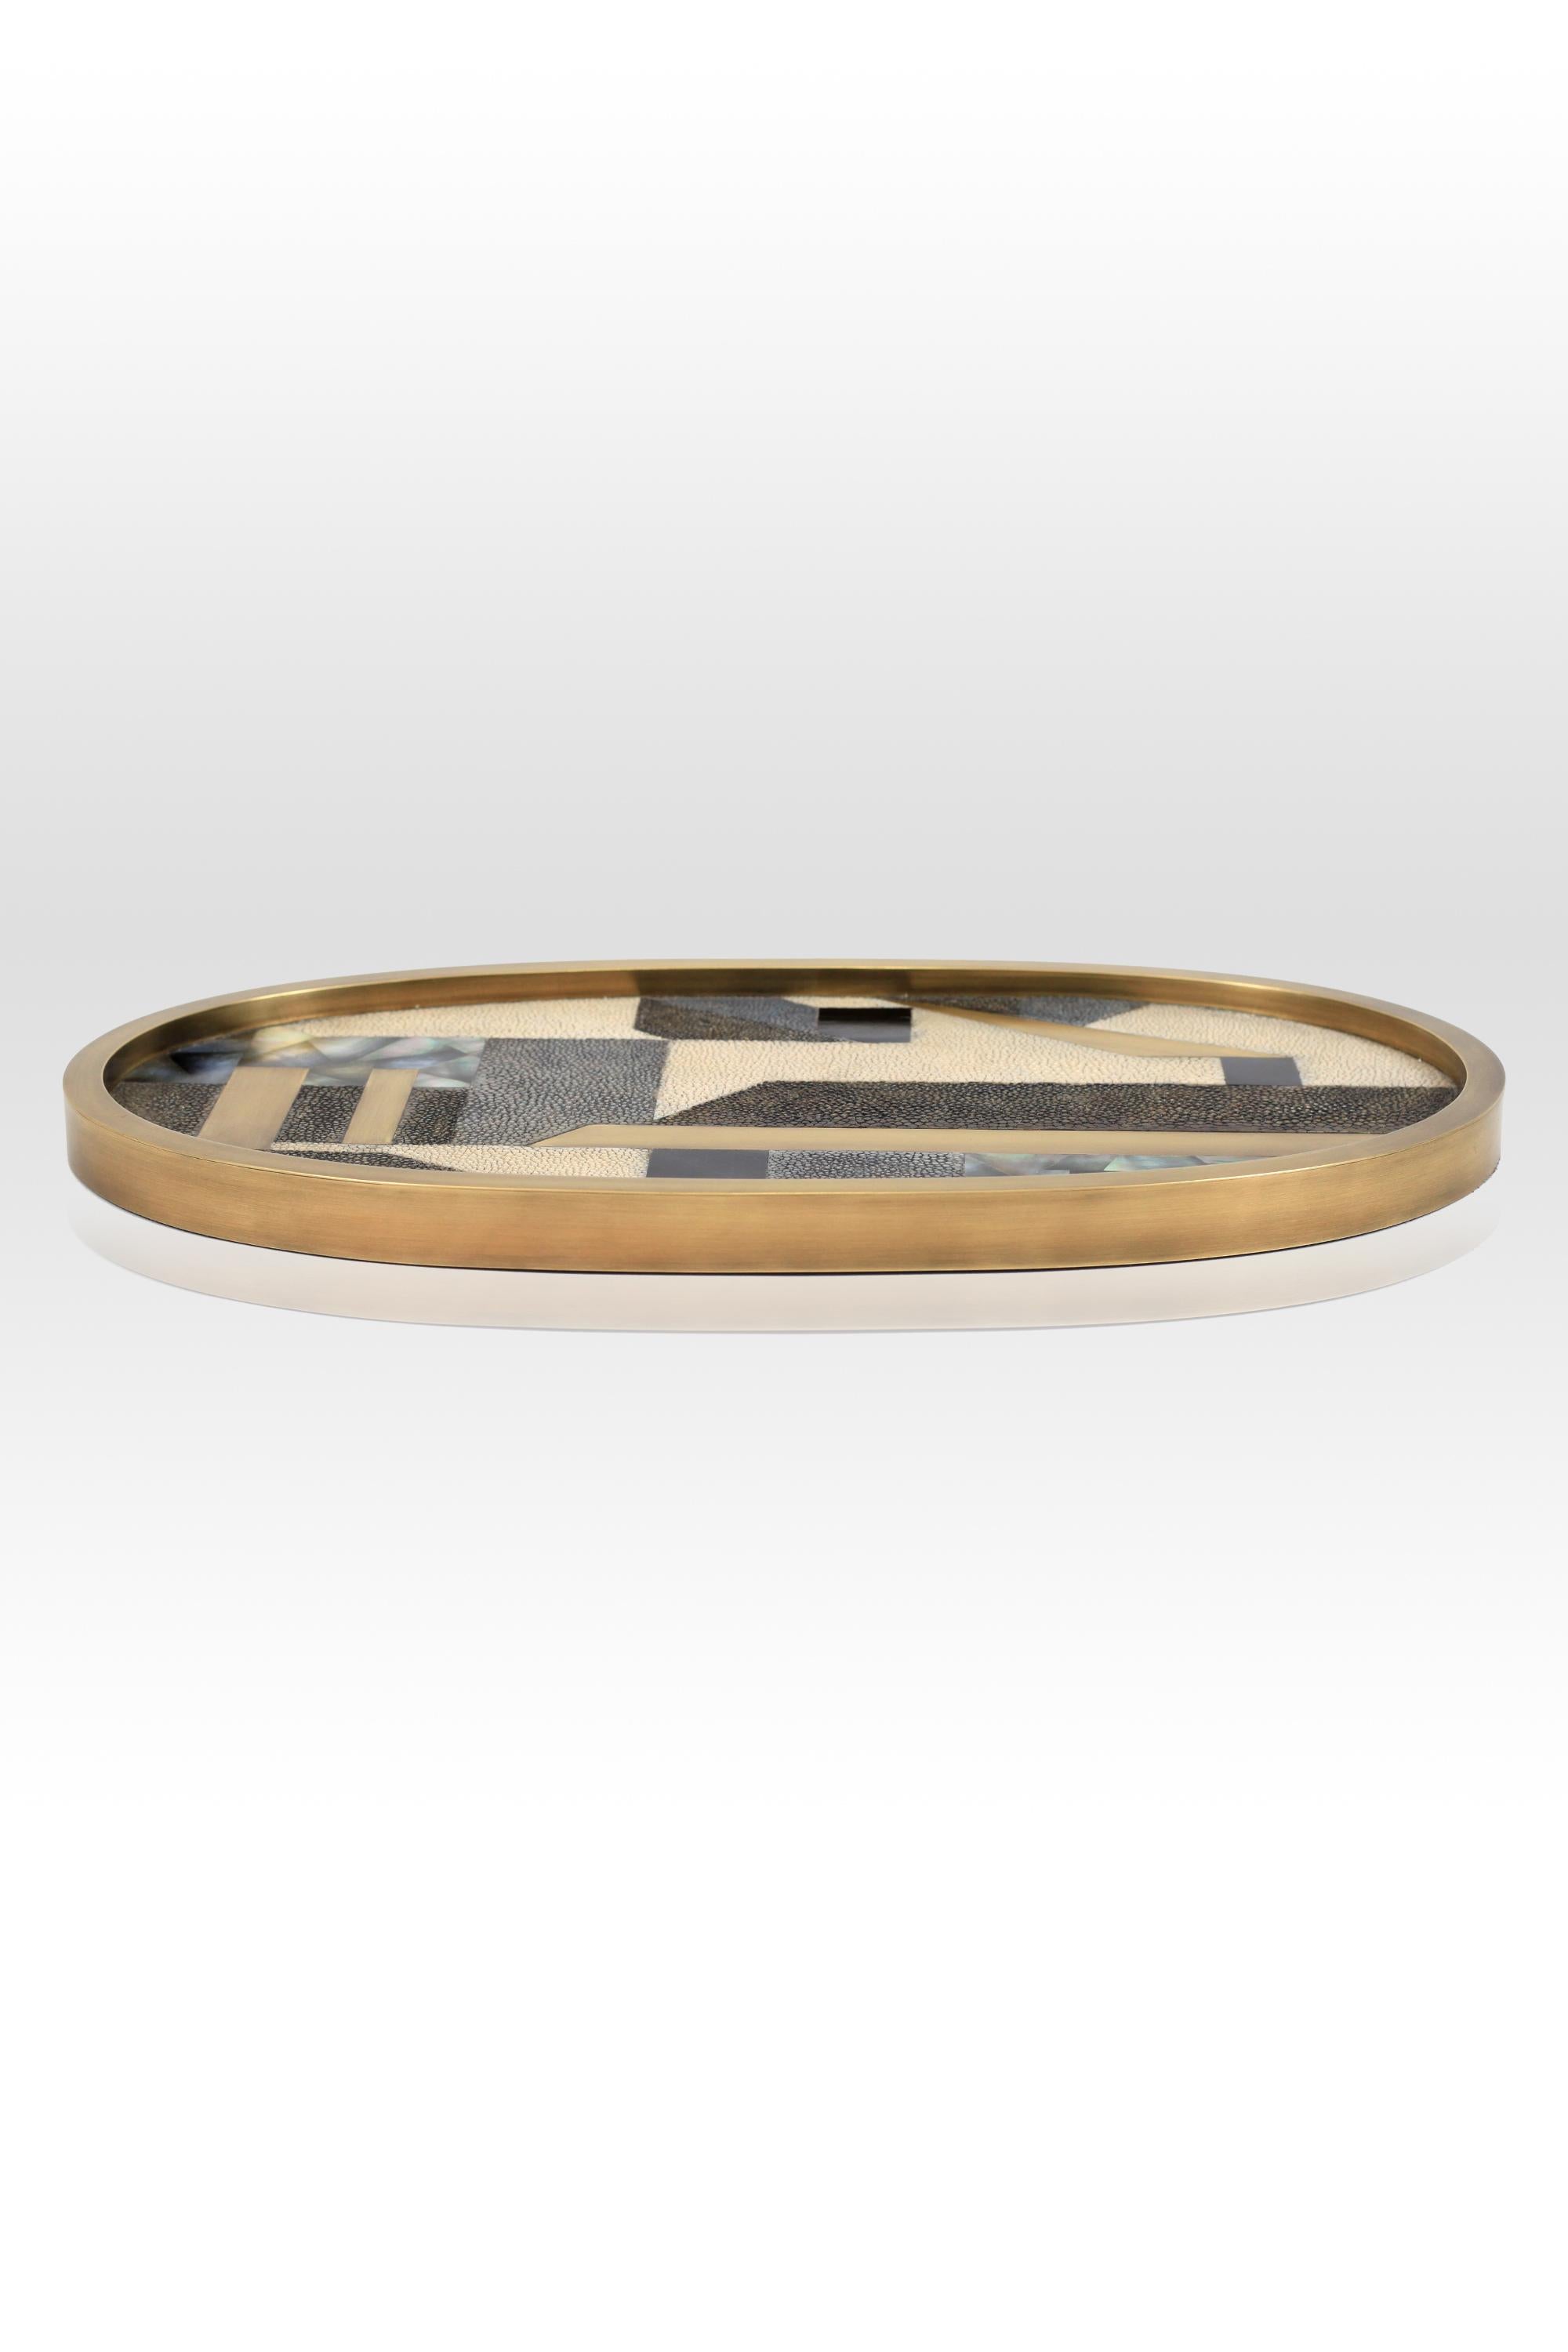 Oval Tray in Cream Shagreen and Brass by Kifu, Paris 9